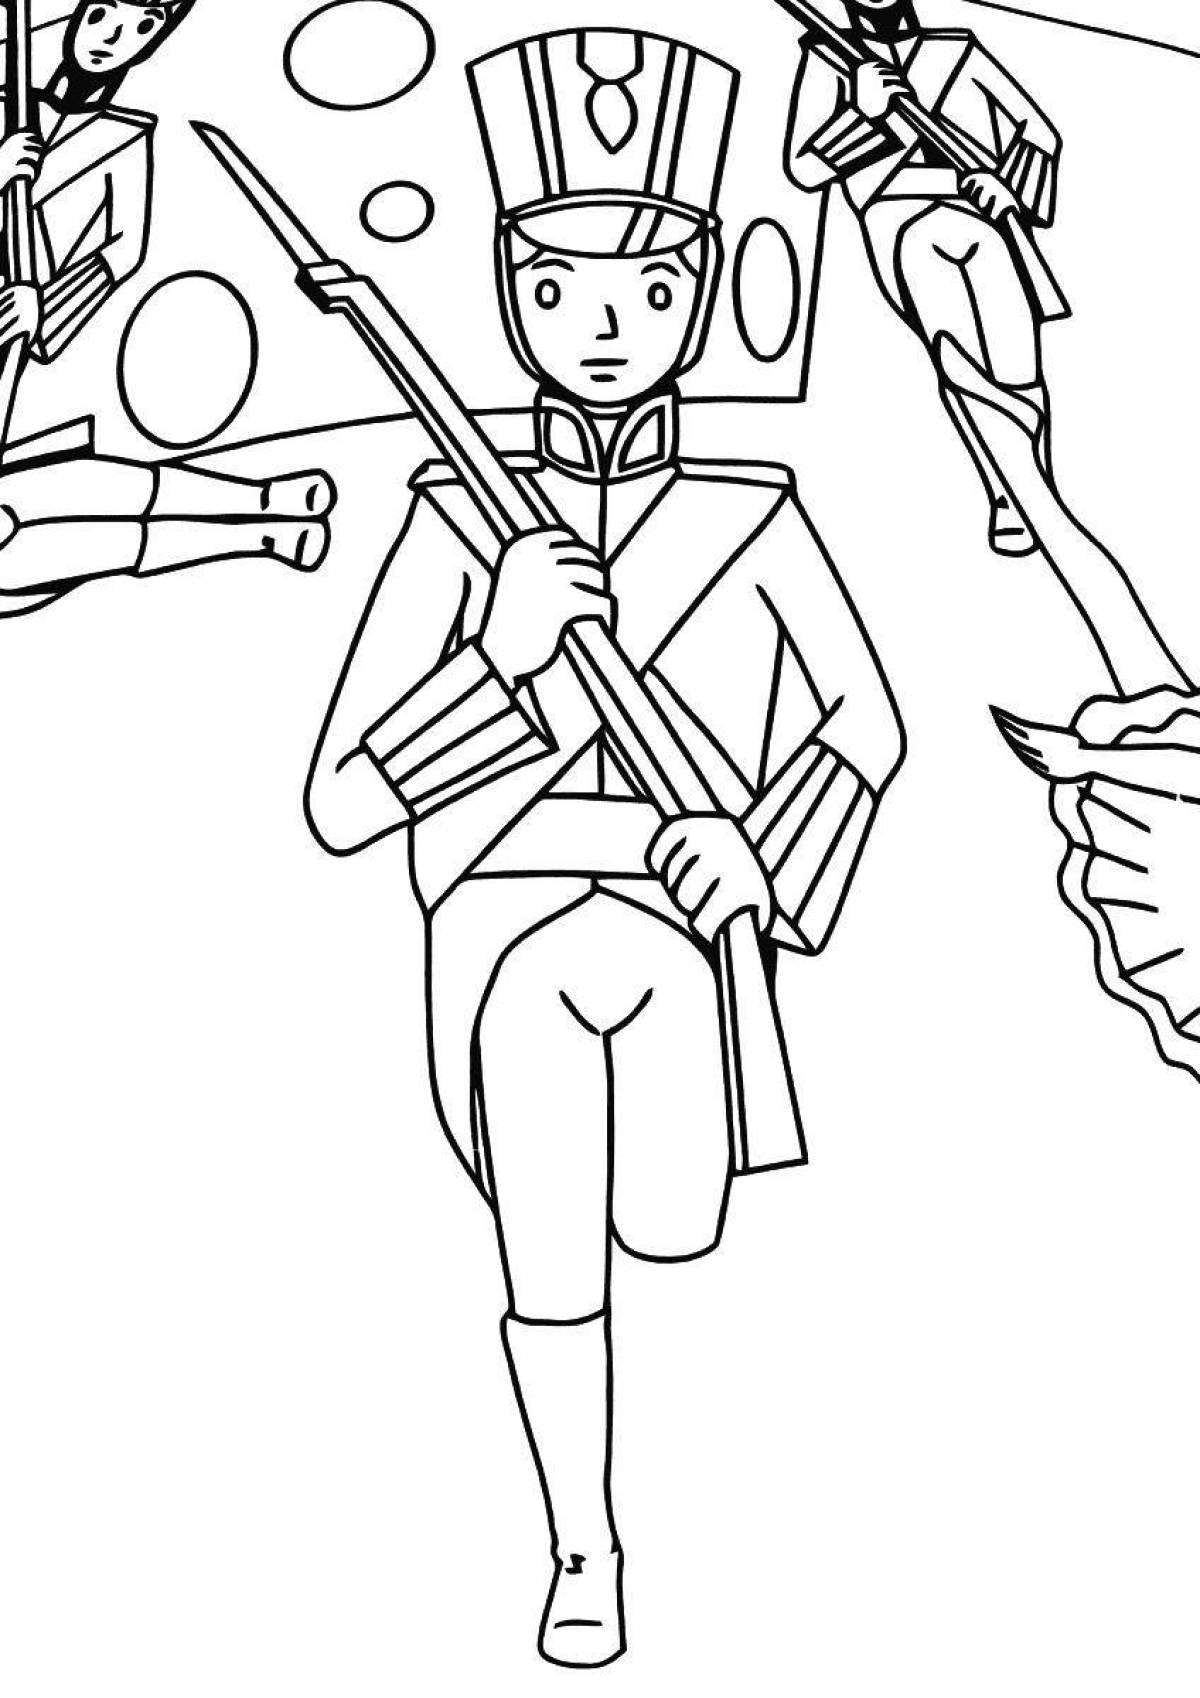 Colouring impenetrable soldier